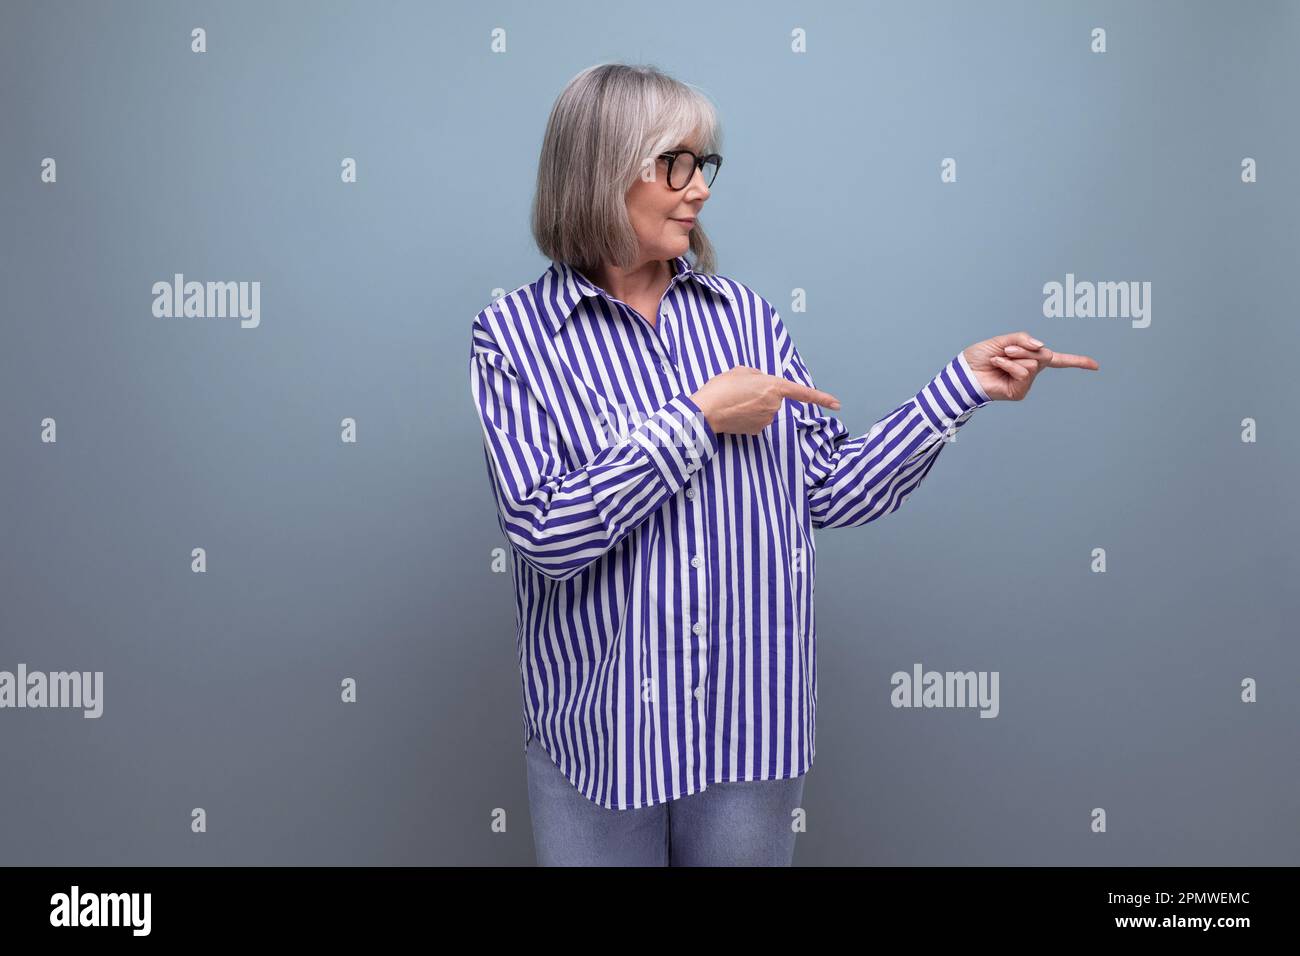 smart stylish mature 60s woman with gray hair on bright studio background with copy space Stock Photo